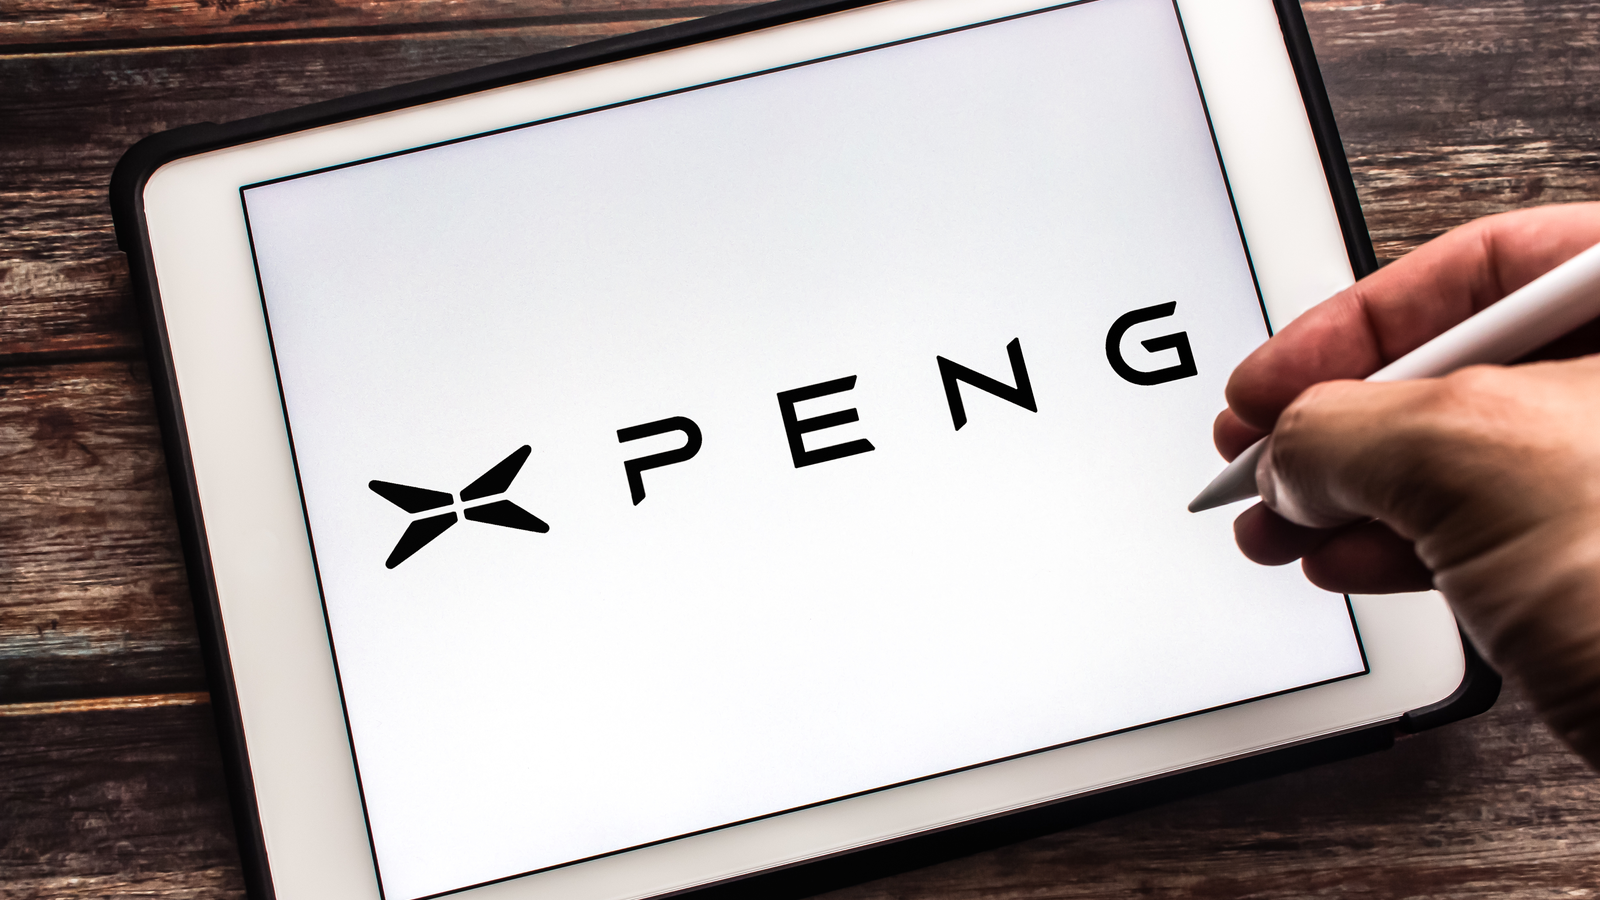 XPEV Stock. The Logo of Chinese electric vehicle manufacturer Xpeng (Guangzhou Xiaopeng Motors, also known as XMotors.ai) on tablet. XPEV Stock